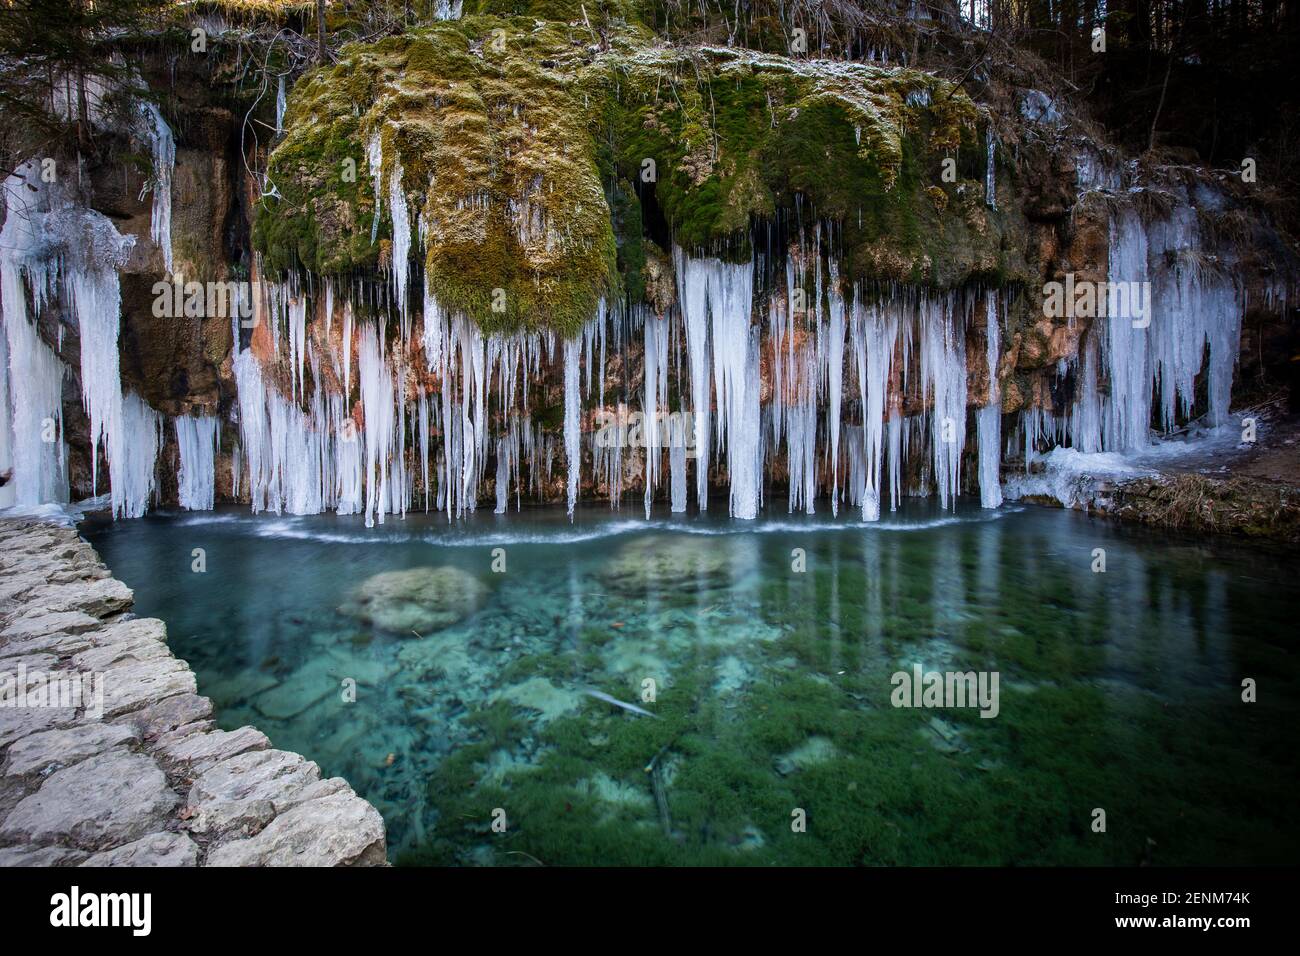 At the Travertine source situated in the valley of the Ernz Noire crystal-clear calcareous water flows over a rock formation into a basin. Stock Photo